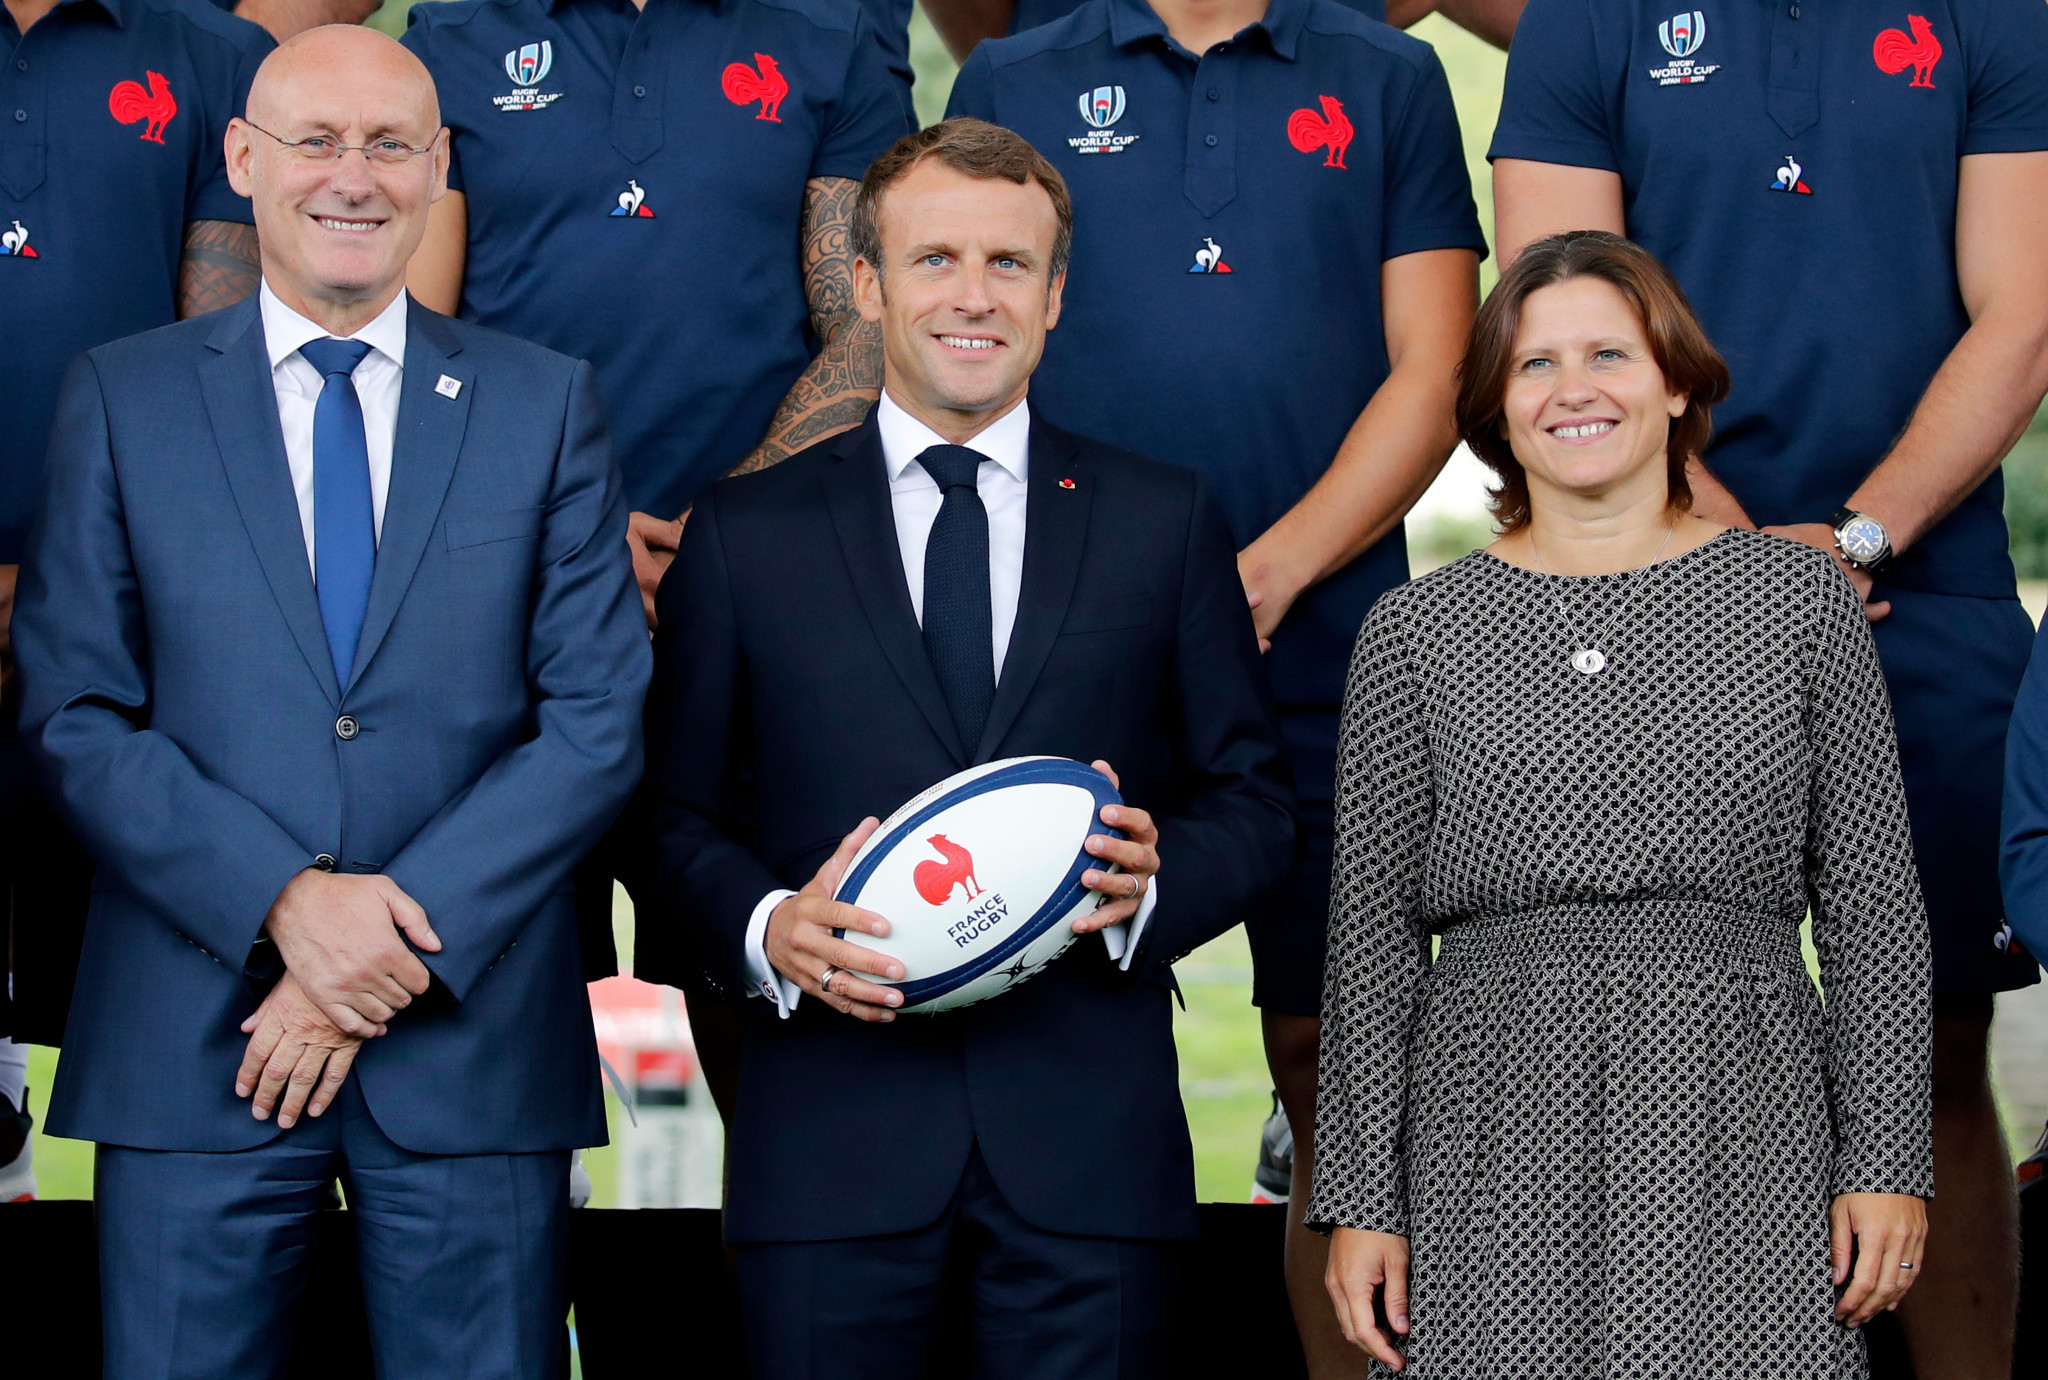 French President Macron to attend 2023 Rugby World Cup draw